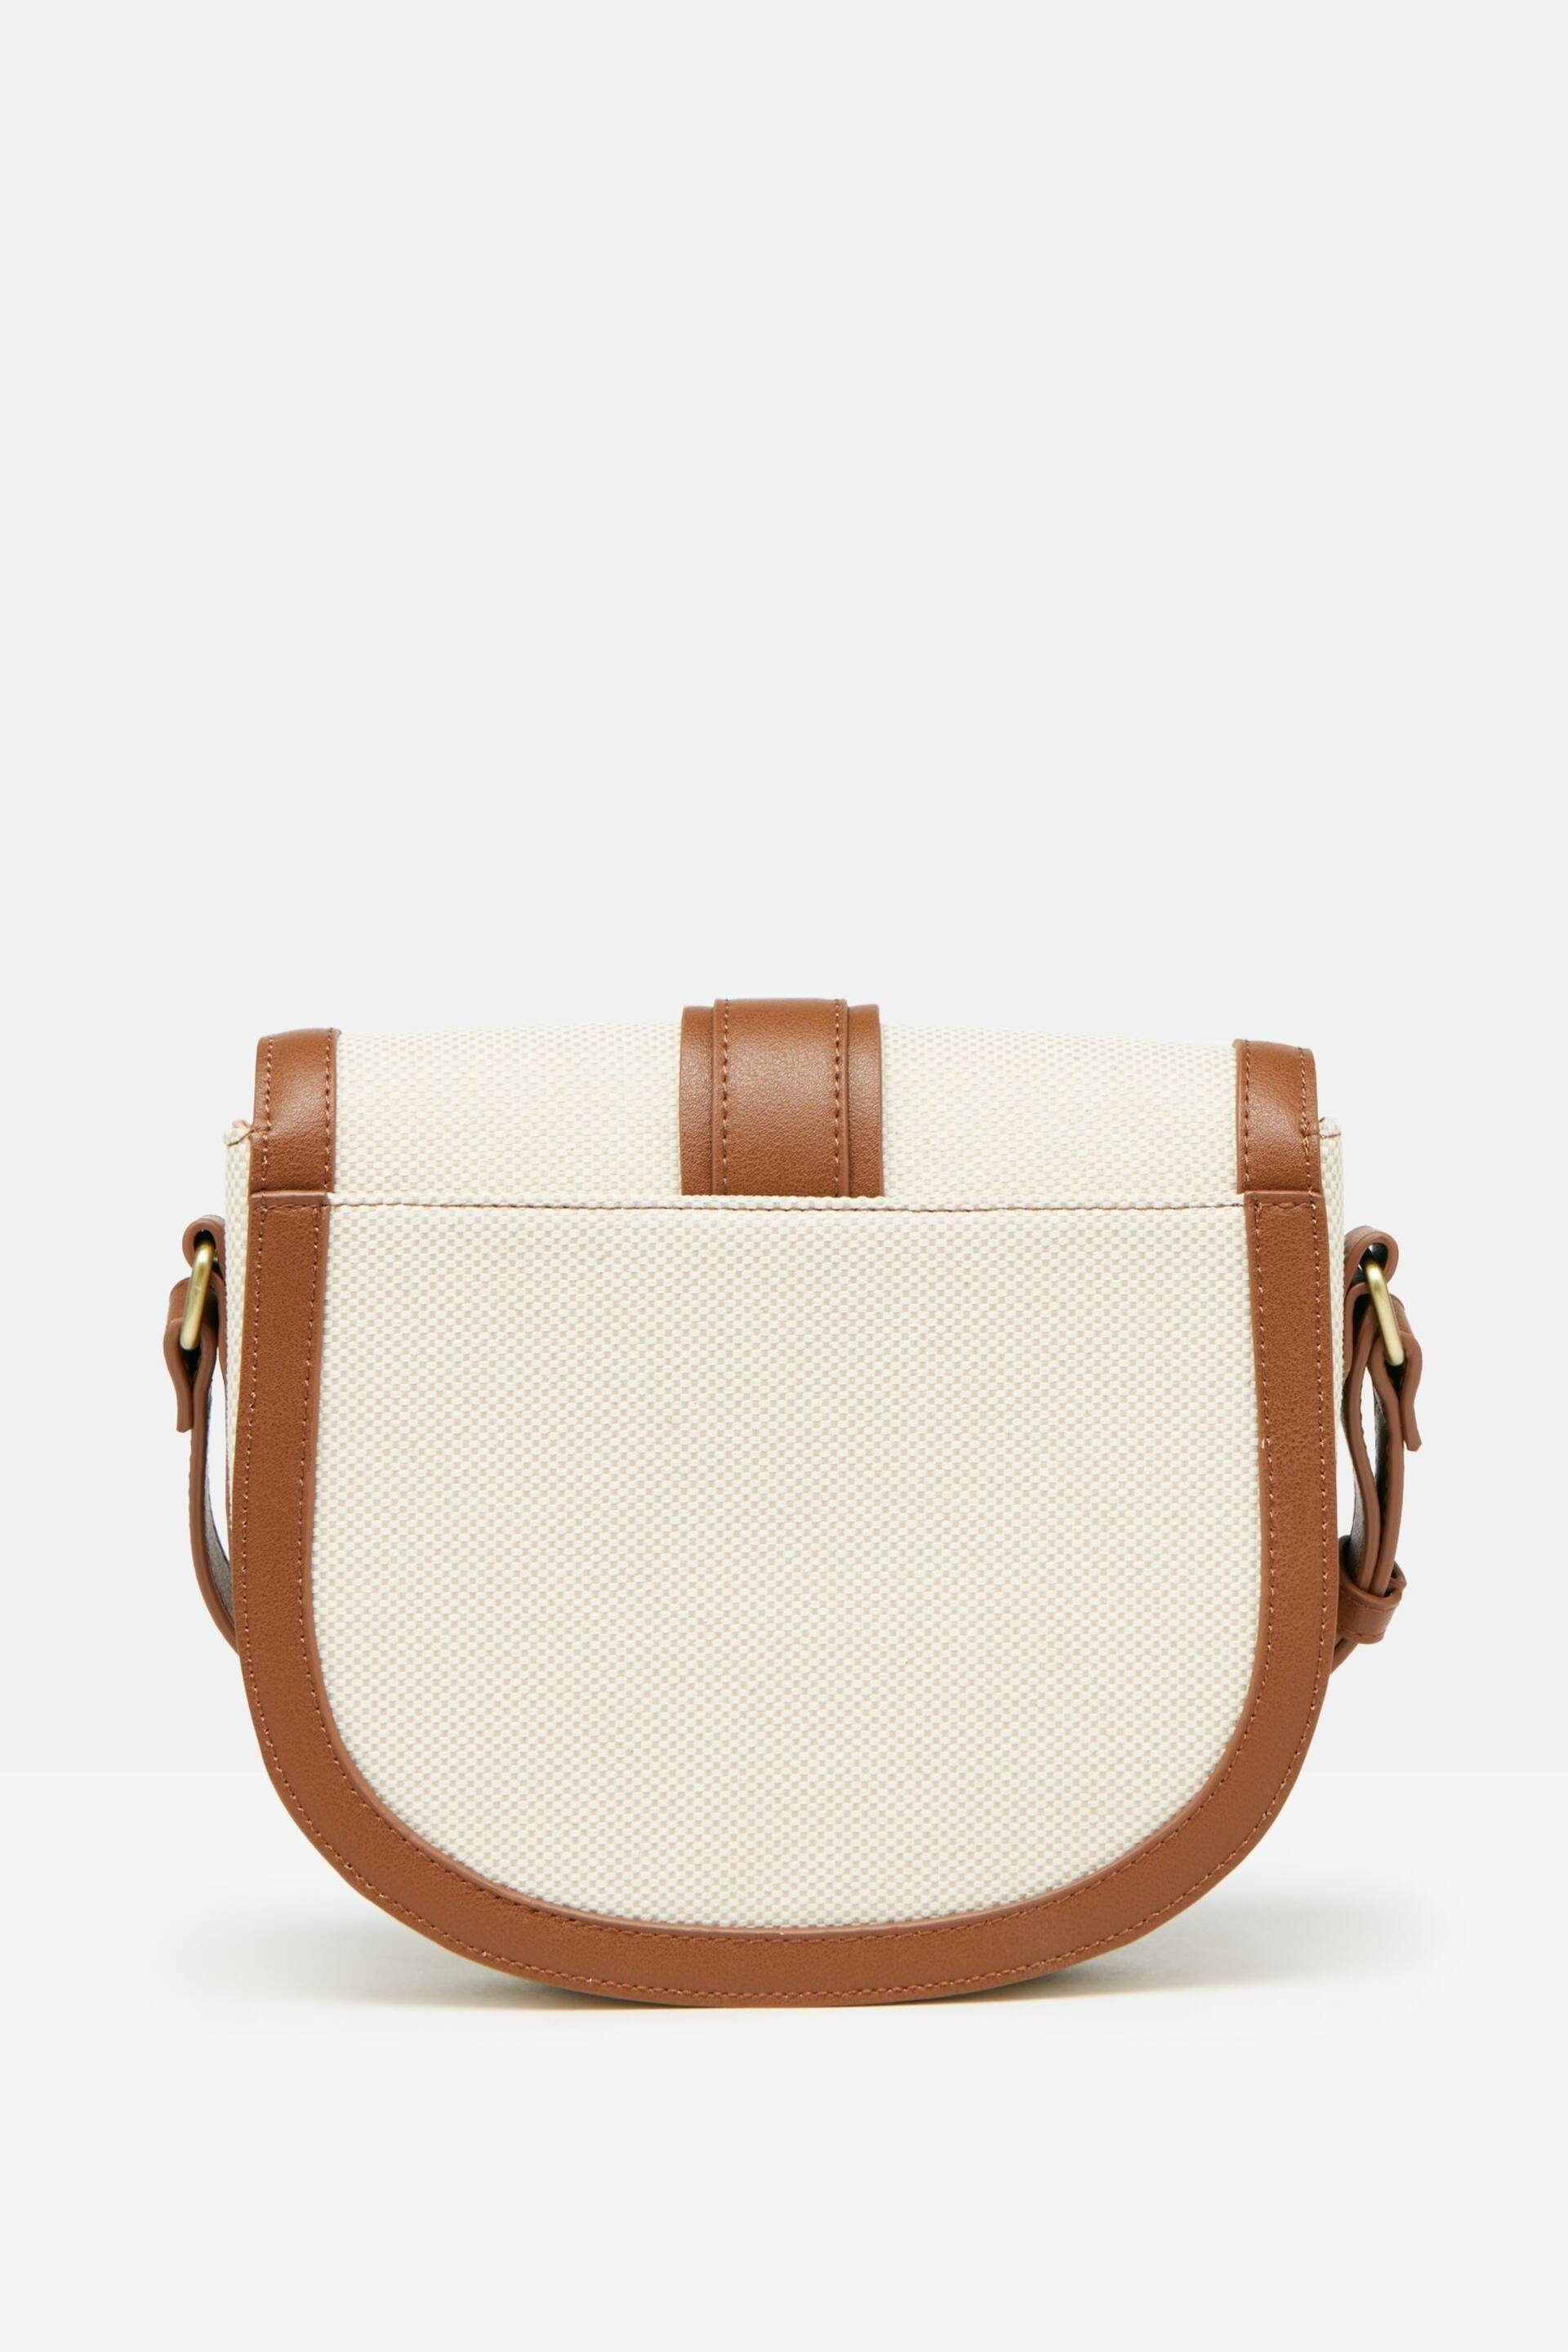 Joules Ludlow Tan Canvas Cross Body Bag - Image 5 of 9